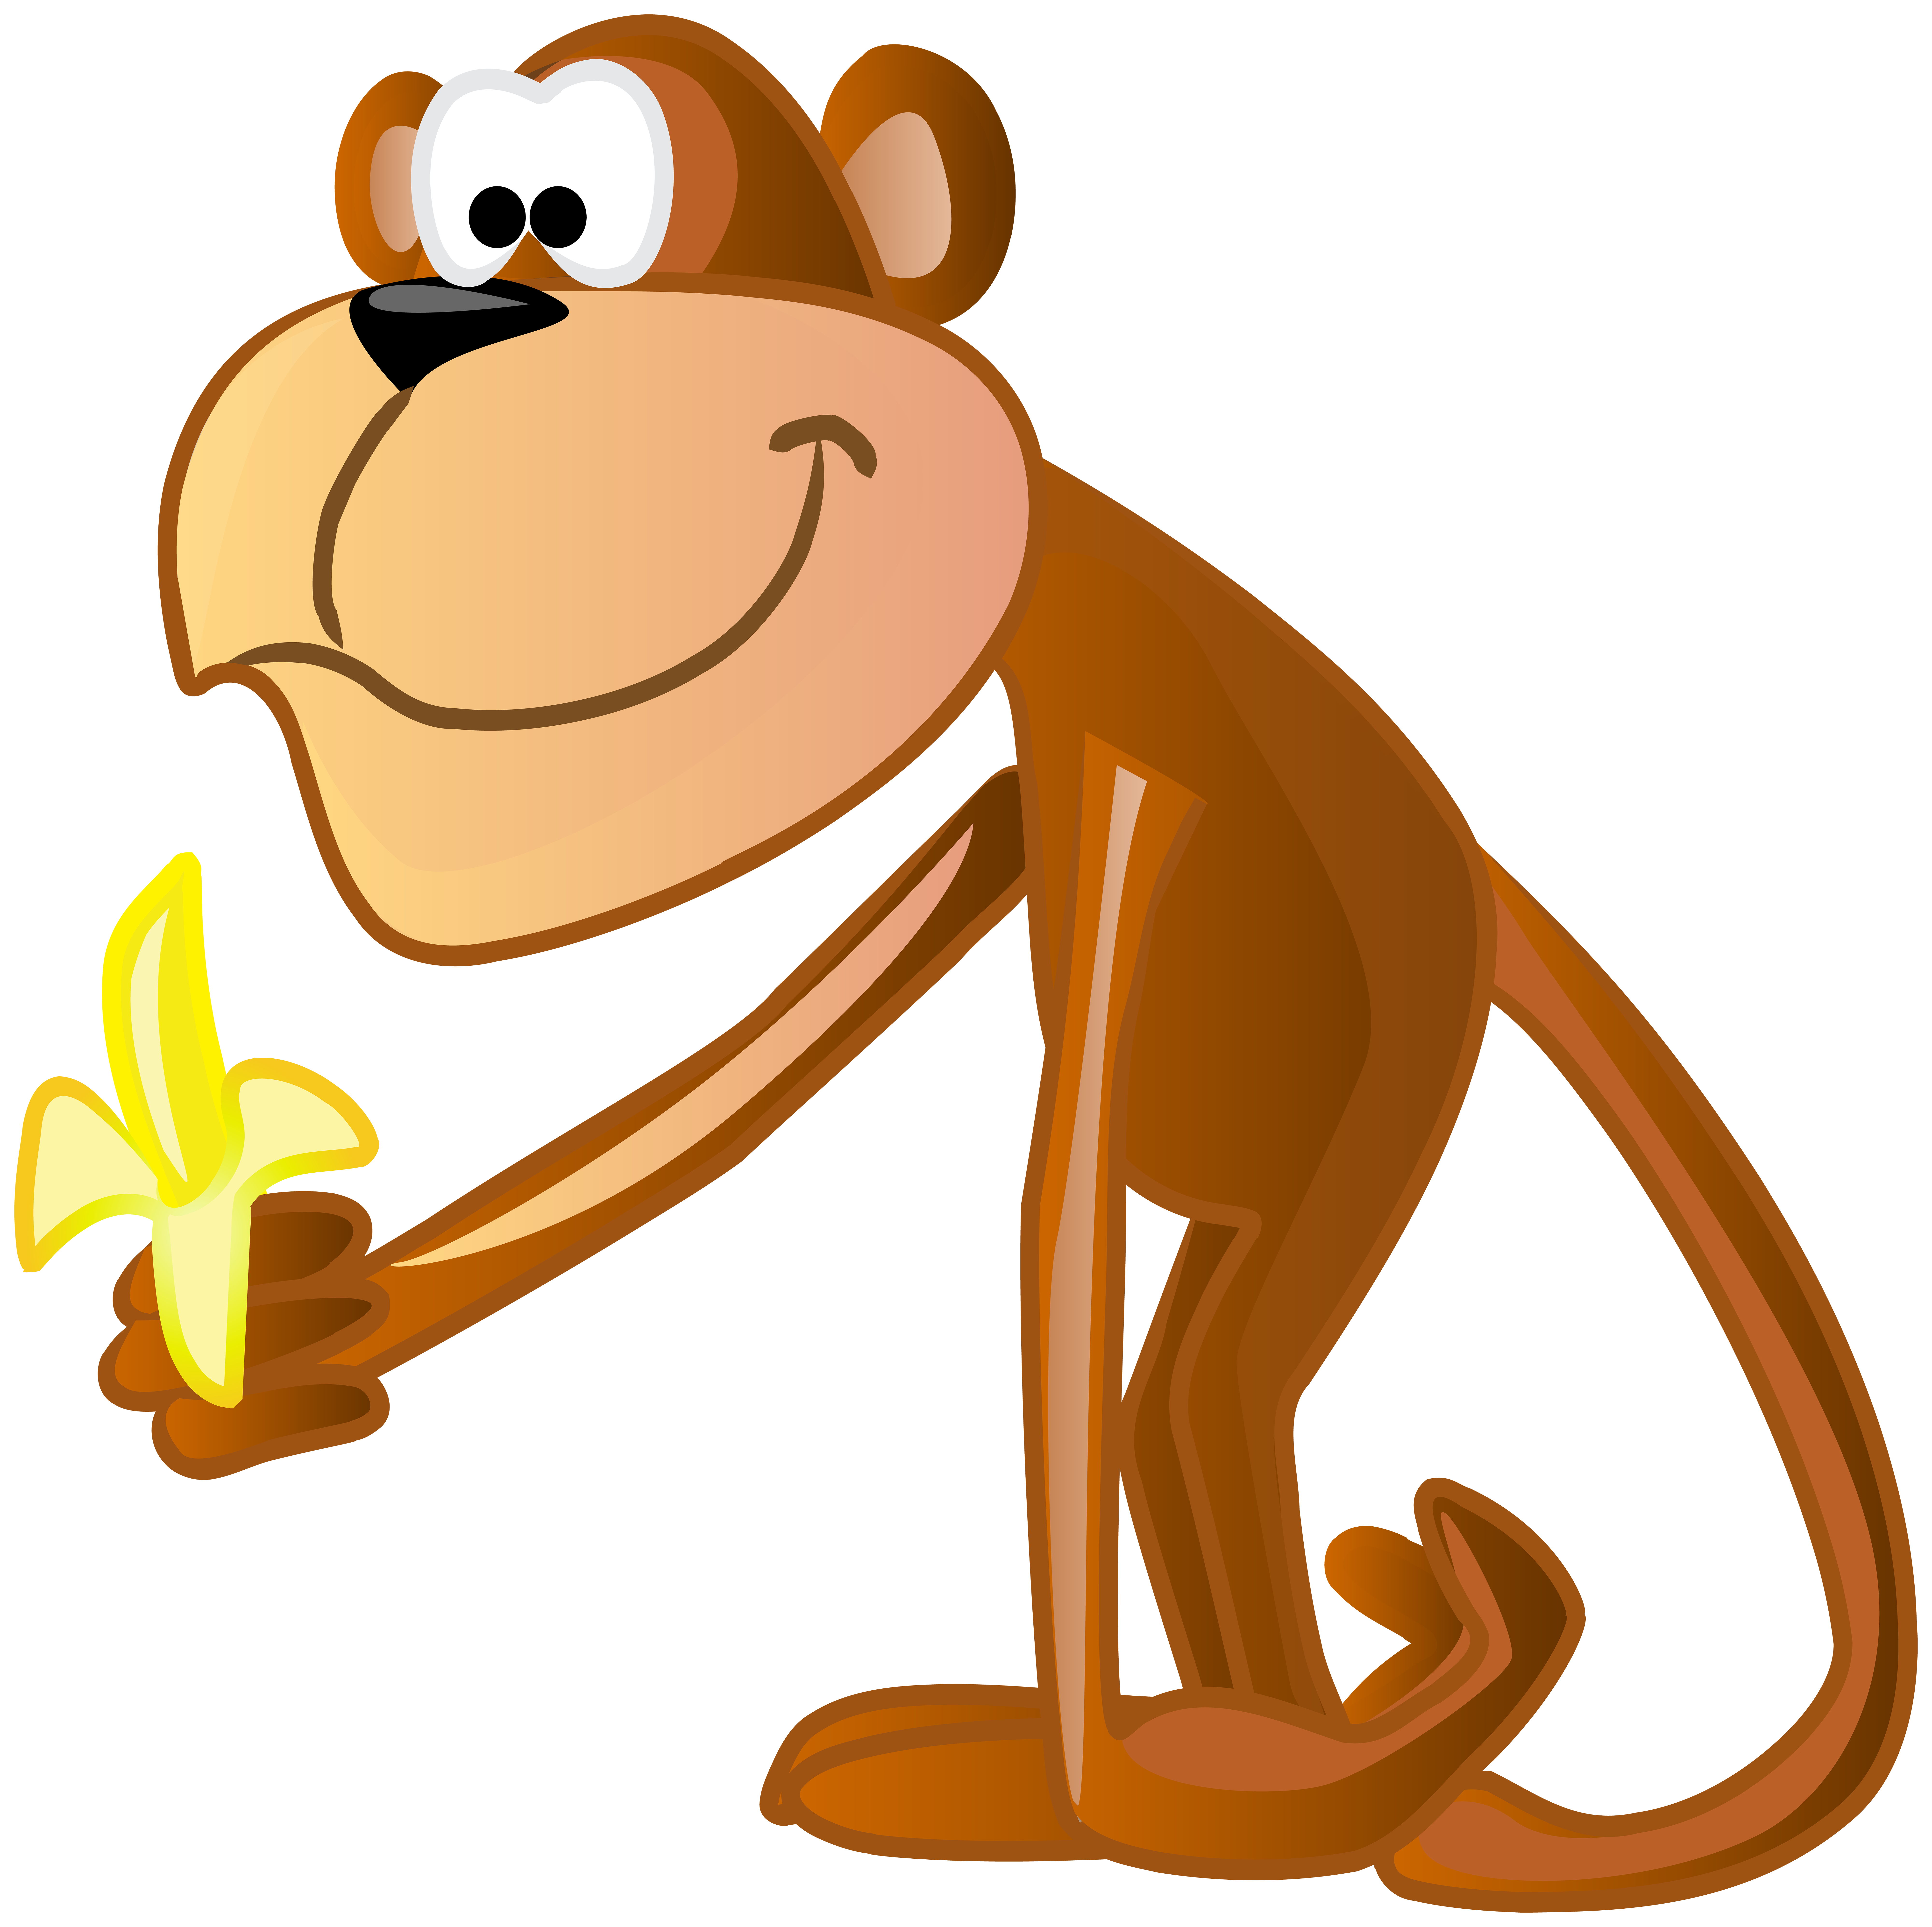 Monkey Cartoon Clip Art Image​ | Gallery Yopriceville - High-Quality Free  Images and Transparent PNG Clipart